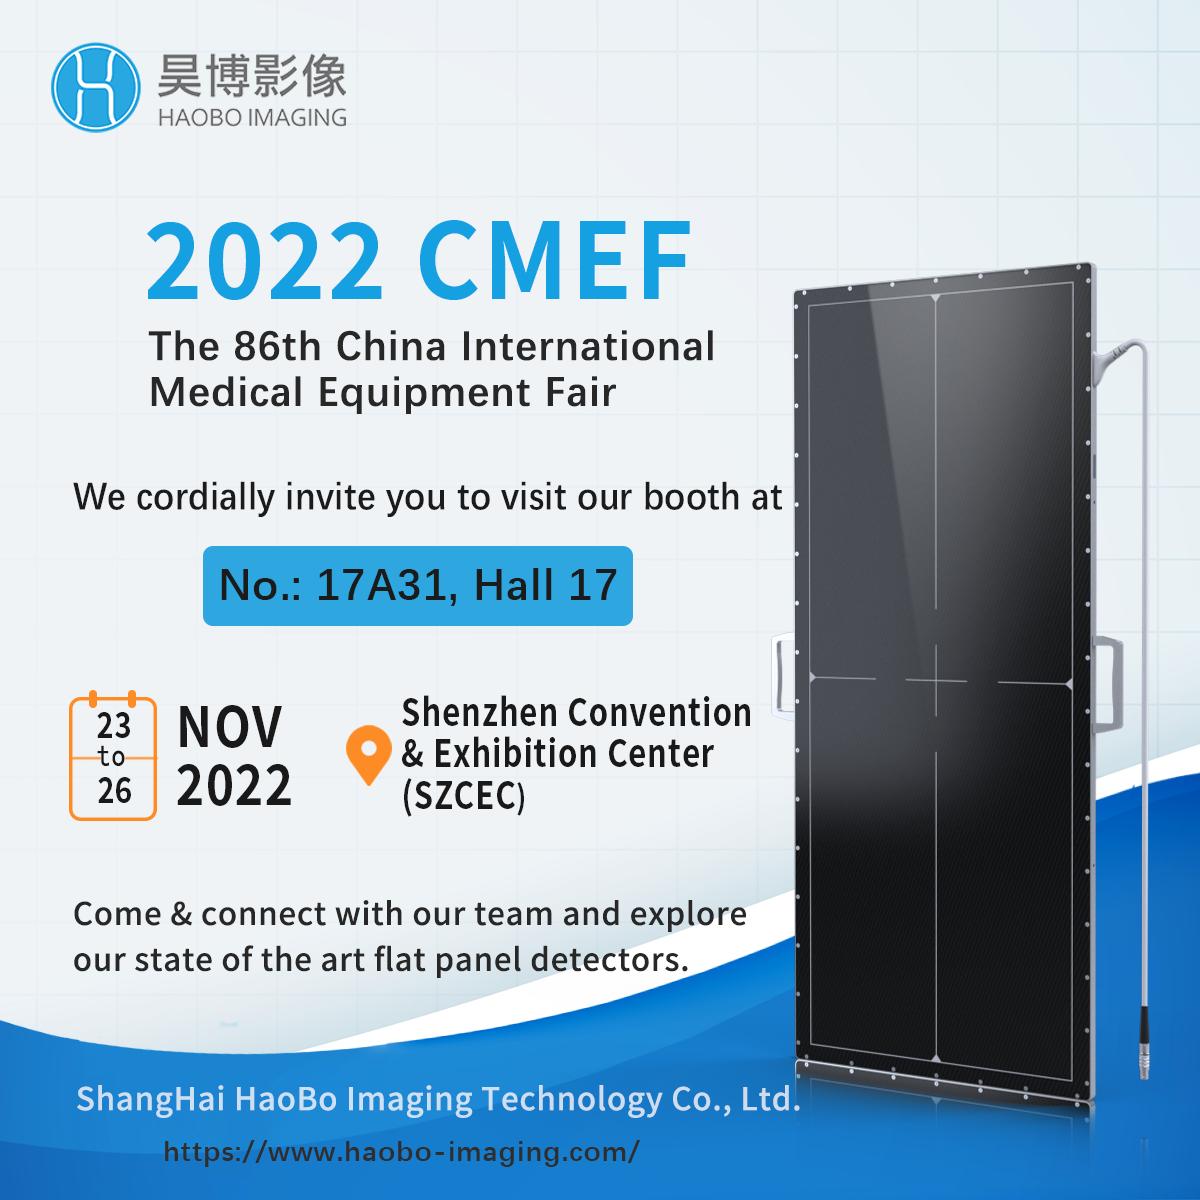 Haobo Imaging sincerely invites you to attend the annual event of CMEF